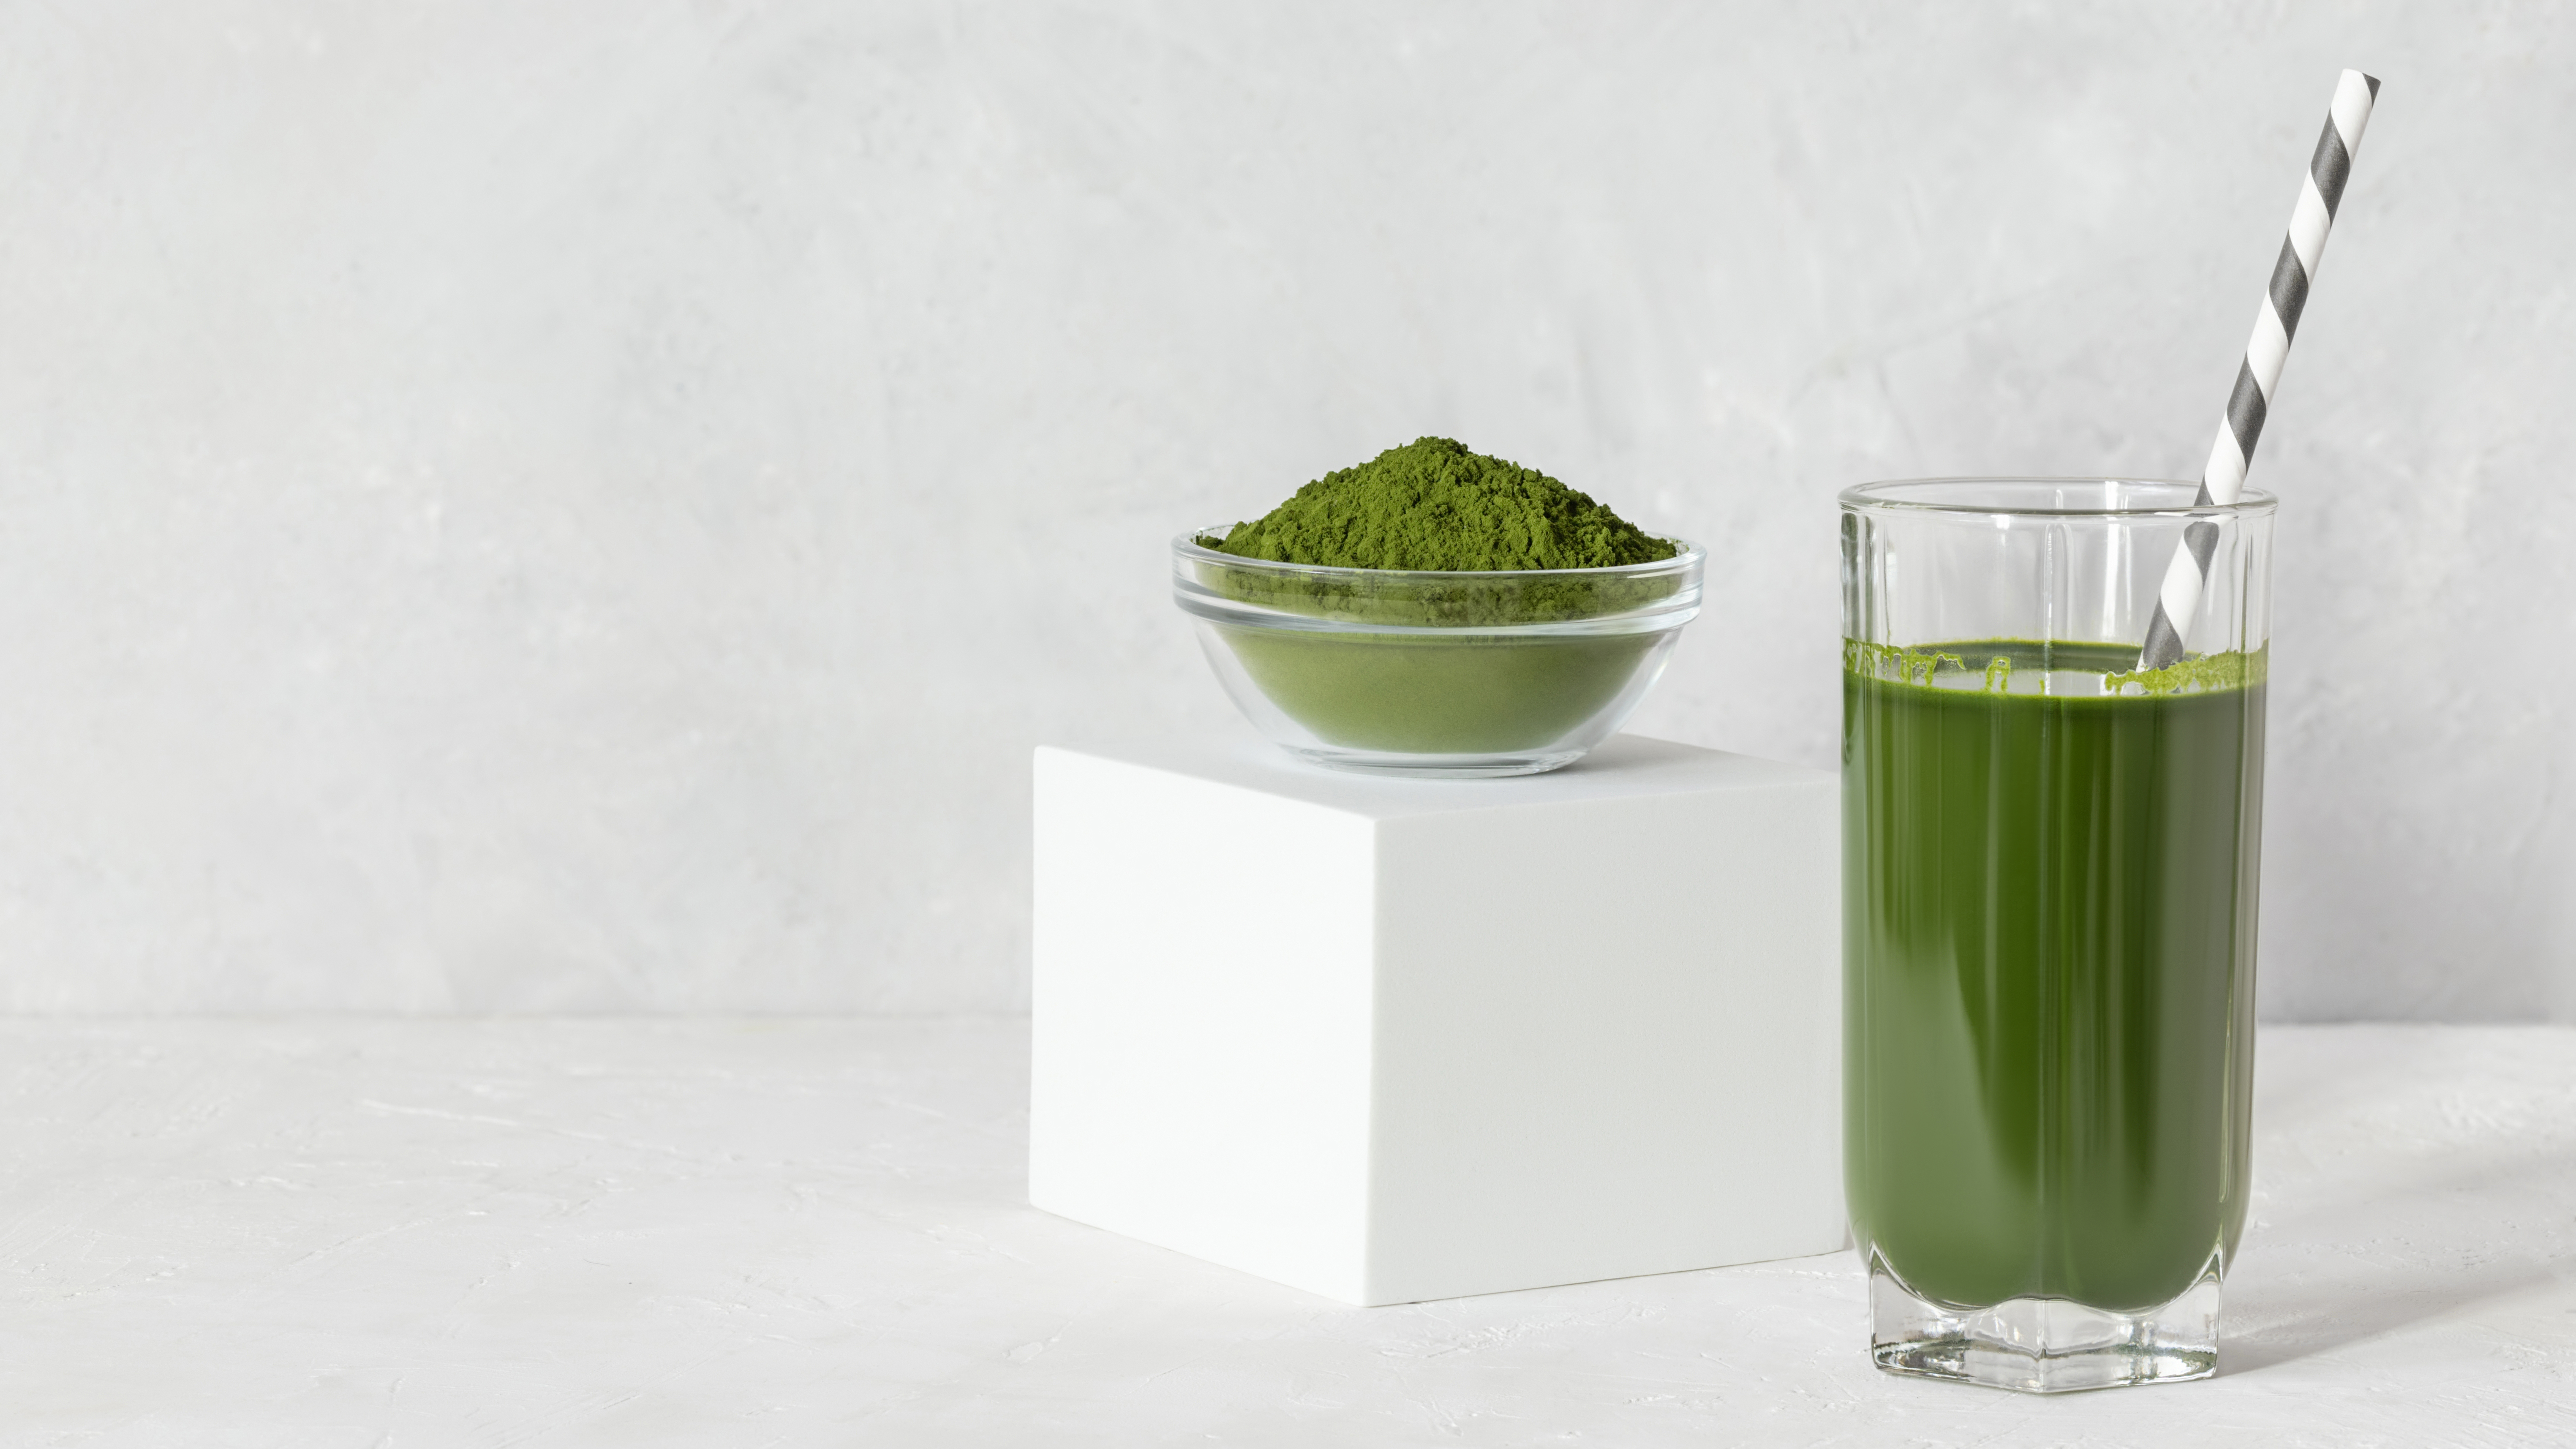 Greens powders are seeing a rise in popularity across social media. Are they good for you?